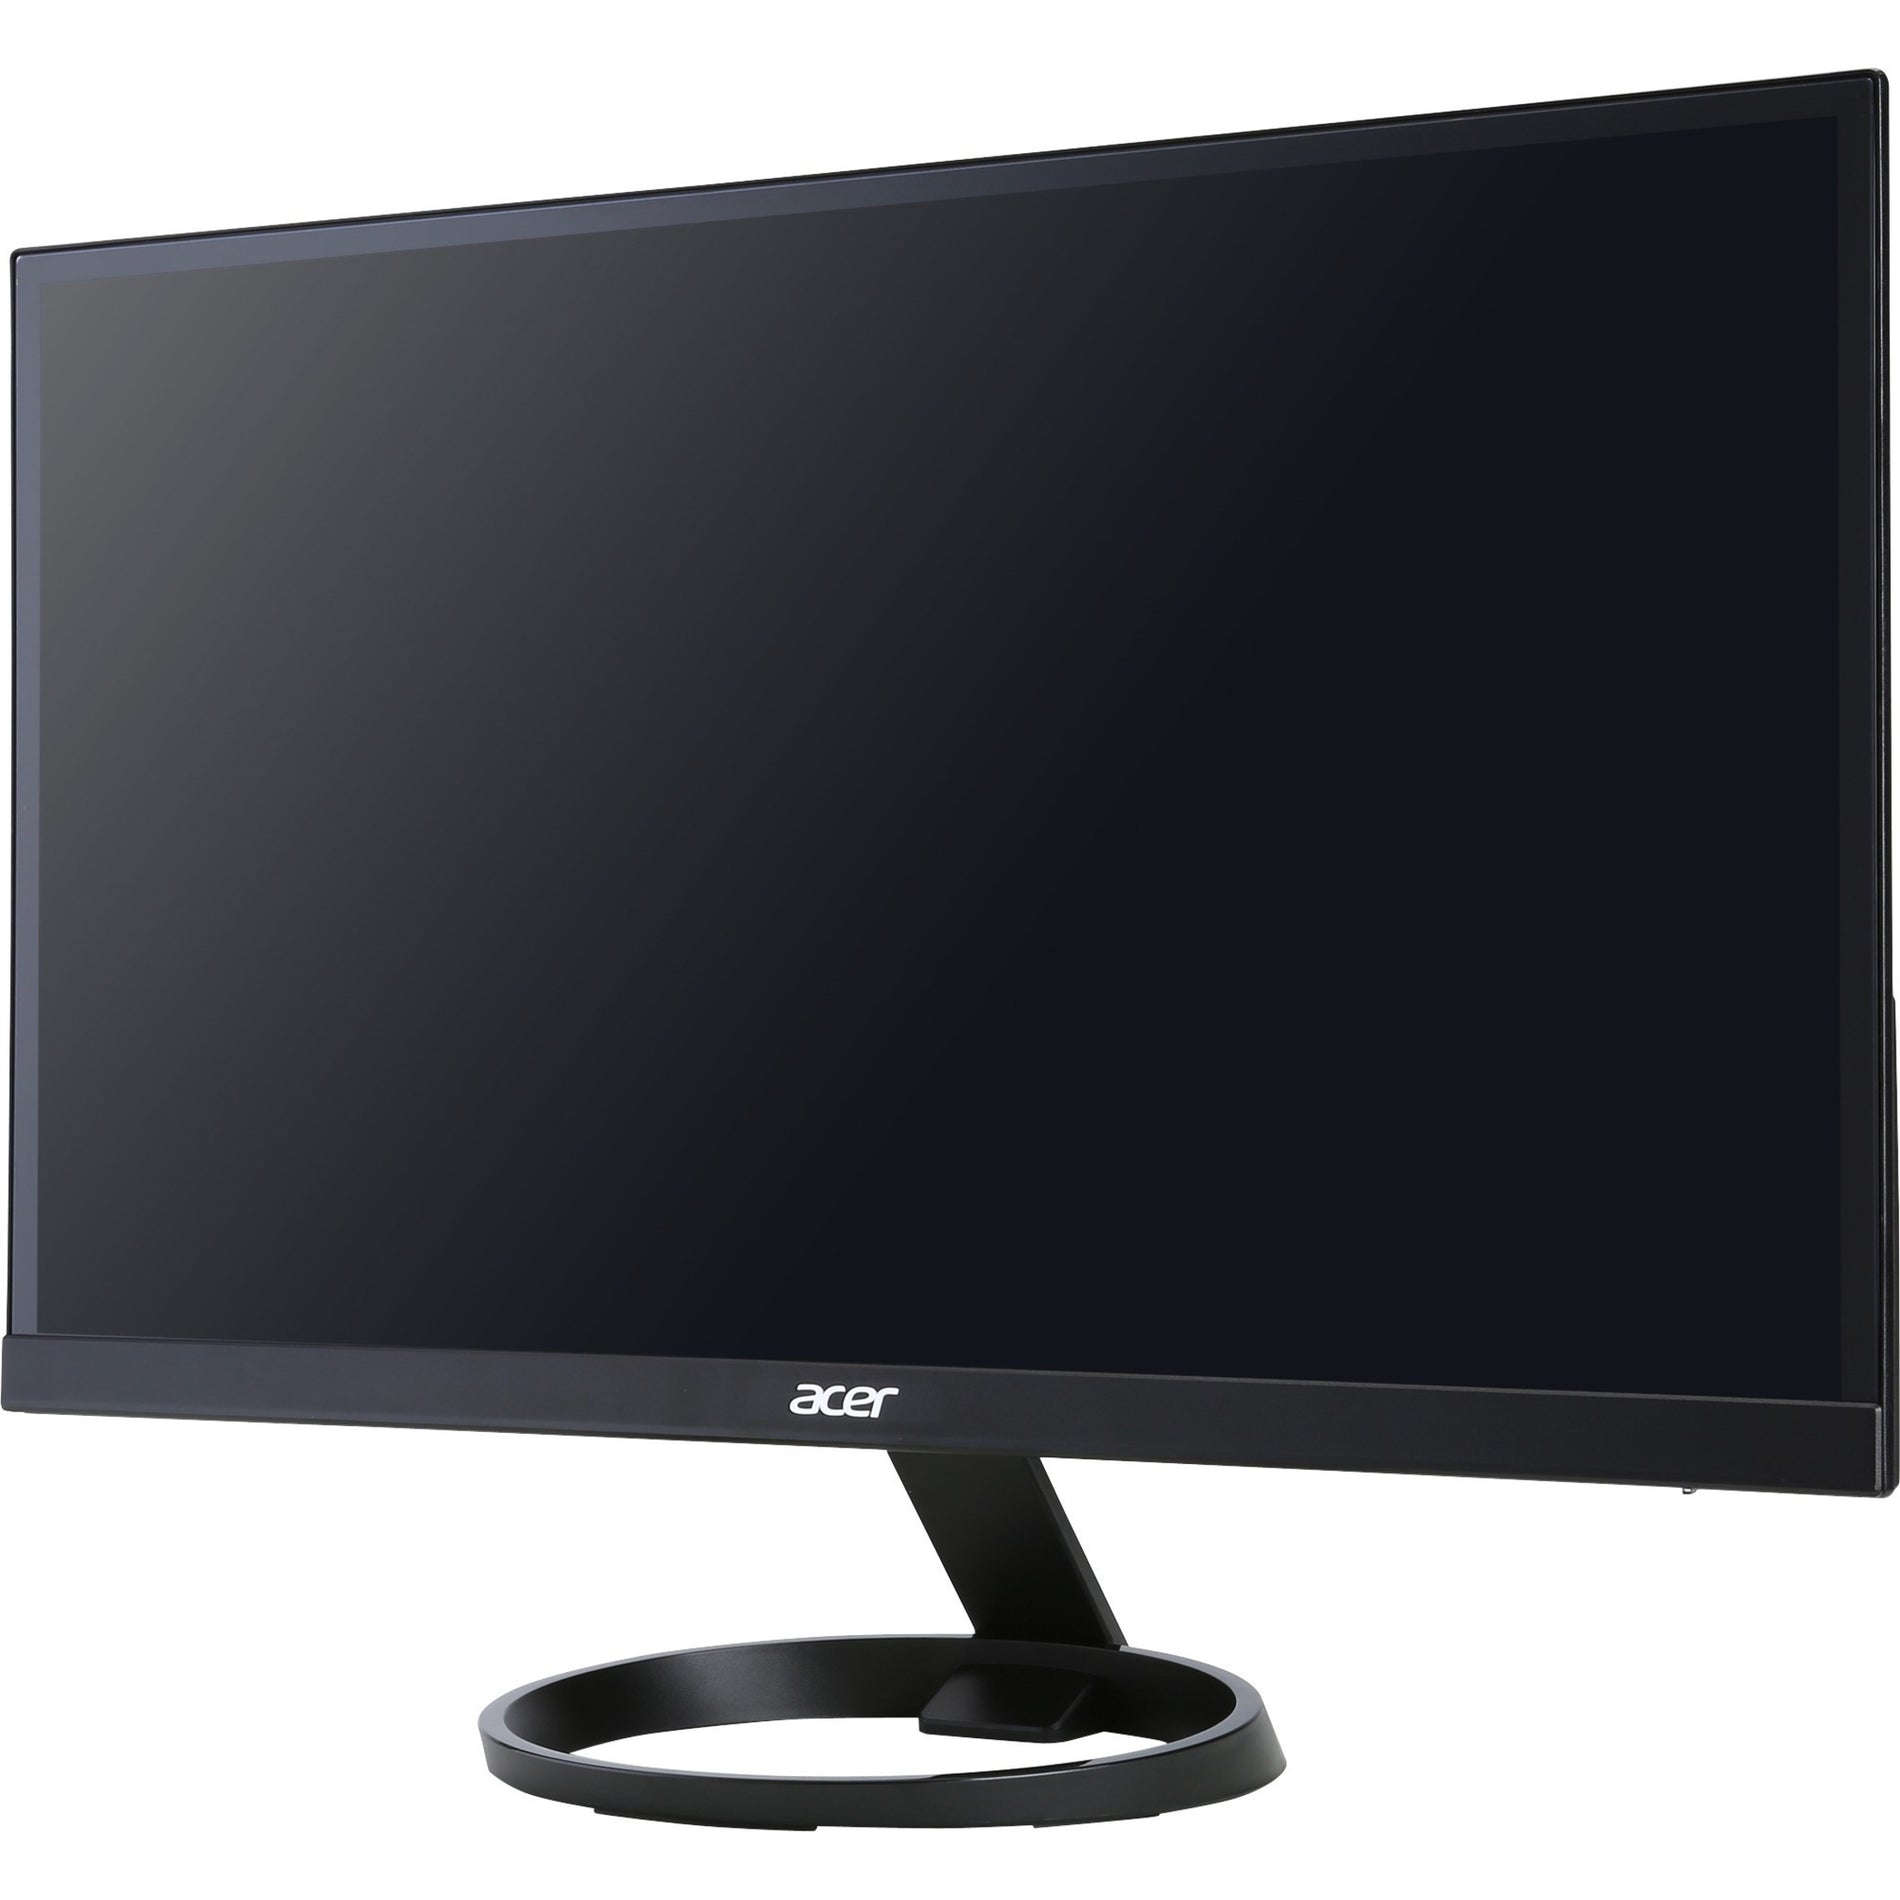 Acer R241Y 23.8" Full HD LCD Monitor - Black [Discontinued]